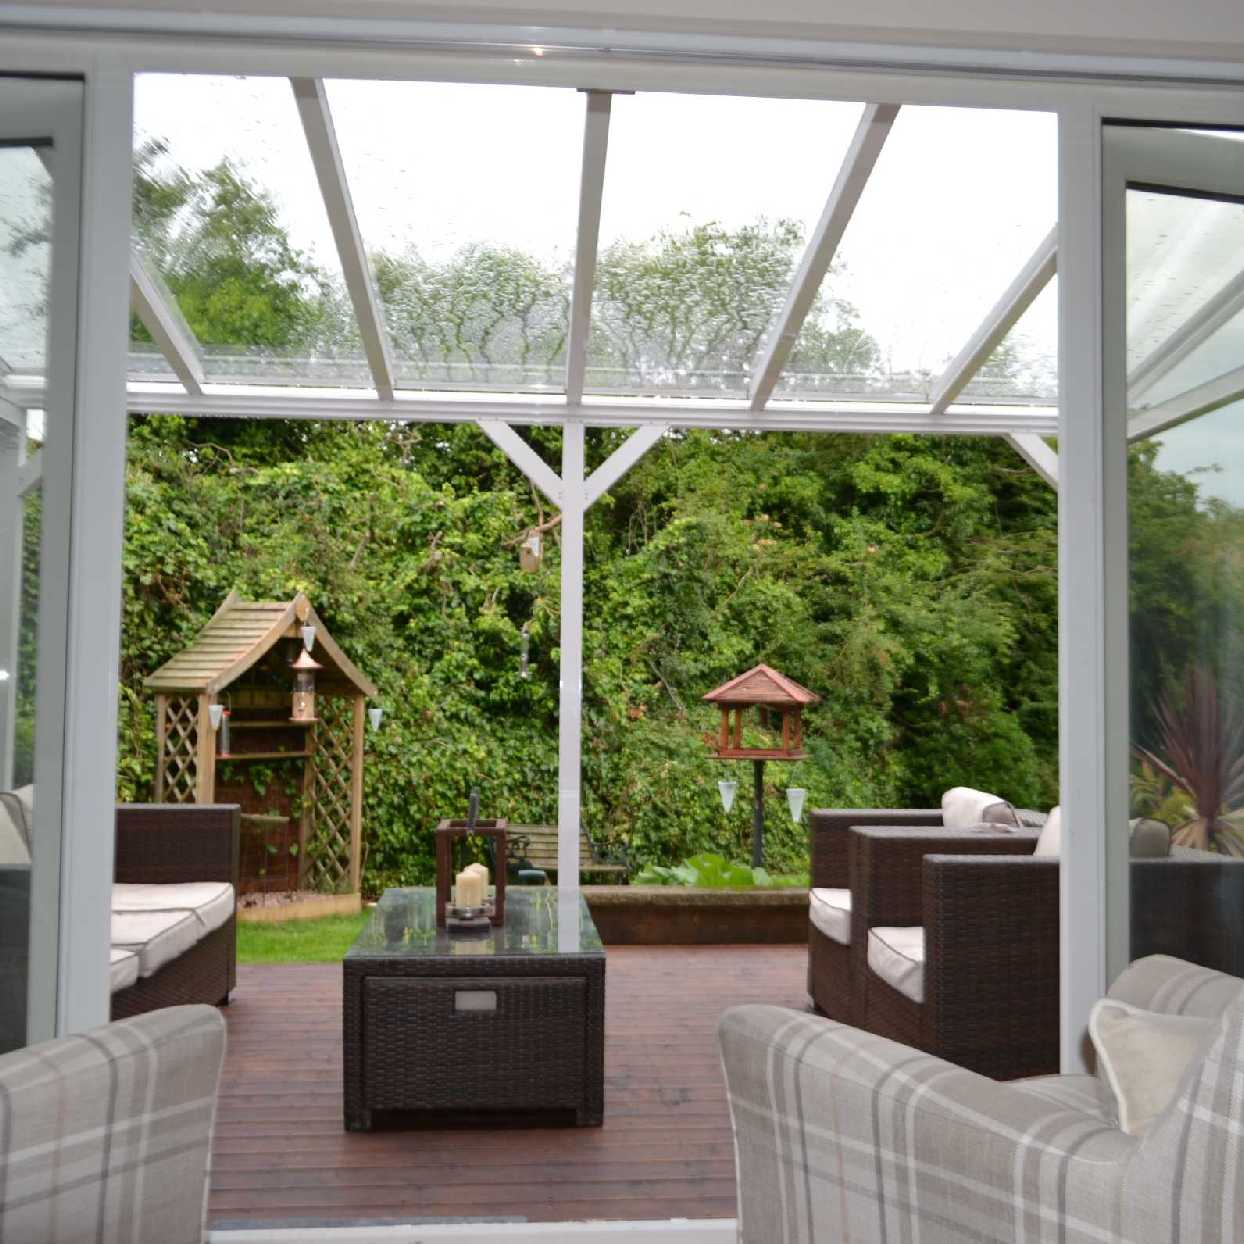 Great selection of Omega Smart Lean-To Canopy, White UNGLAZED for 6mm Glazing - 2.8m (W) x 2.0m (P), (2) Supporting Posts